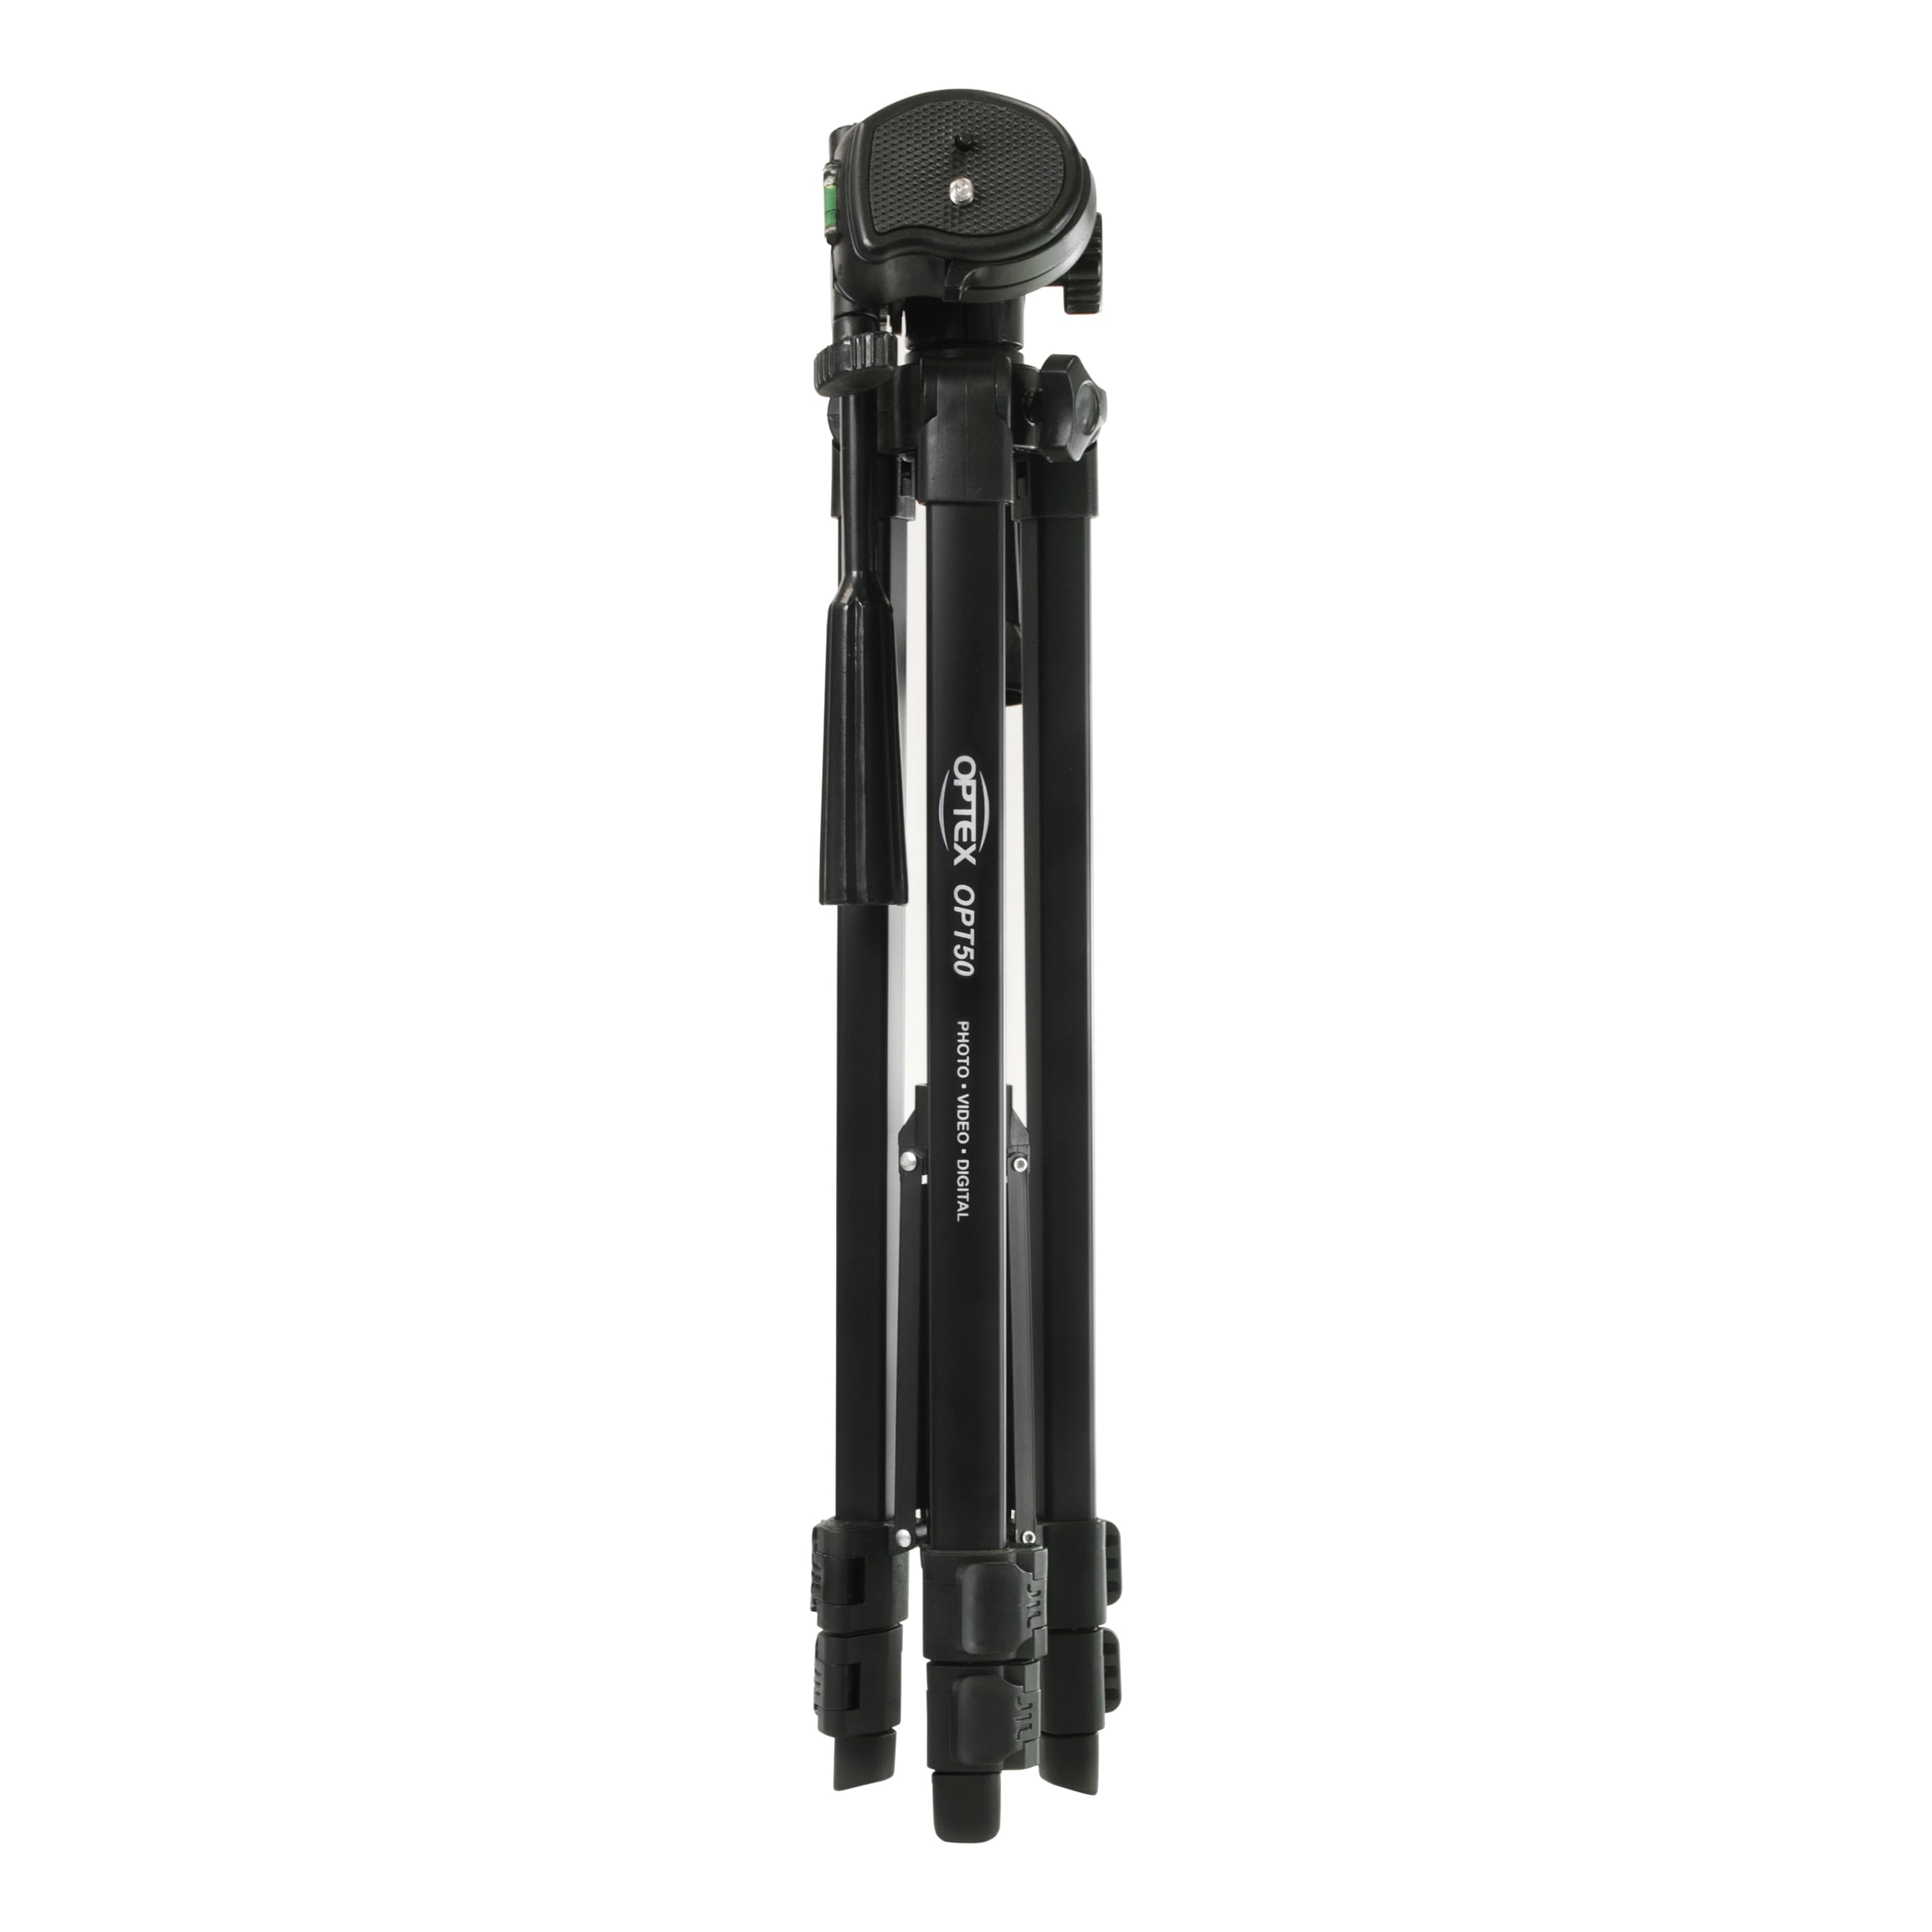 Optex® OPT50 Compact Tripod - Folded View